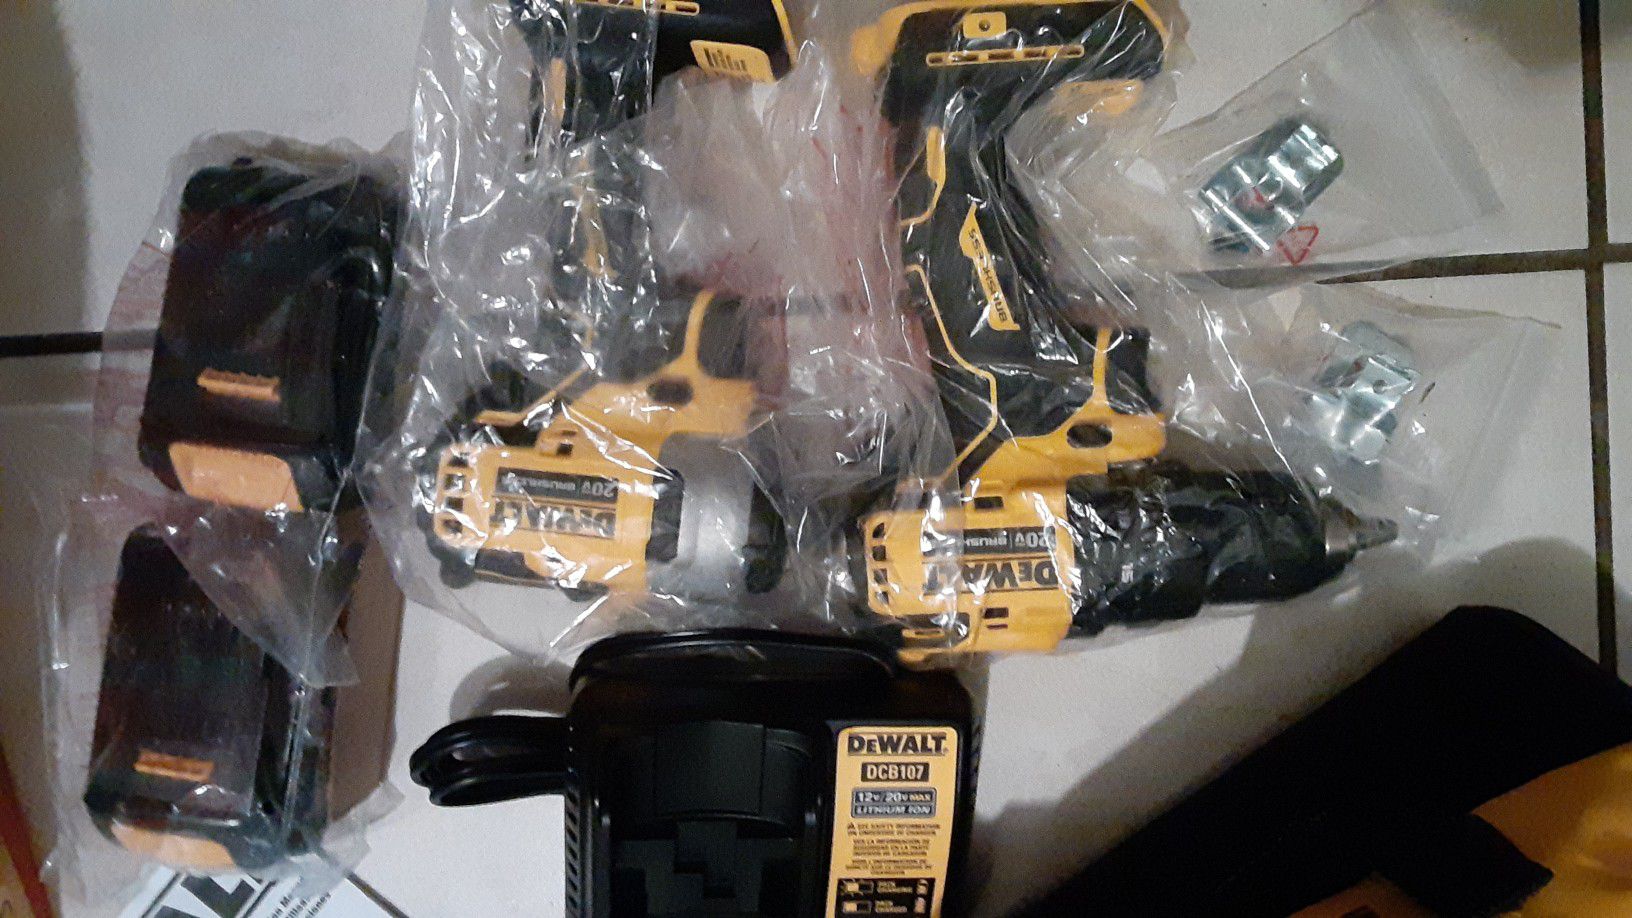 Dewalt 20v set with 1/4 in impact 1/2 in drill driver with 106 PC bit set